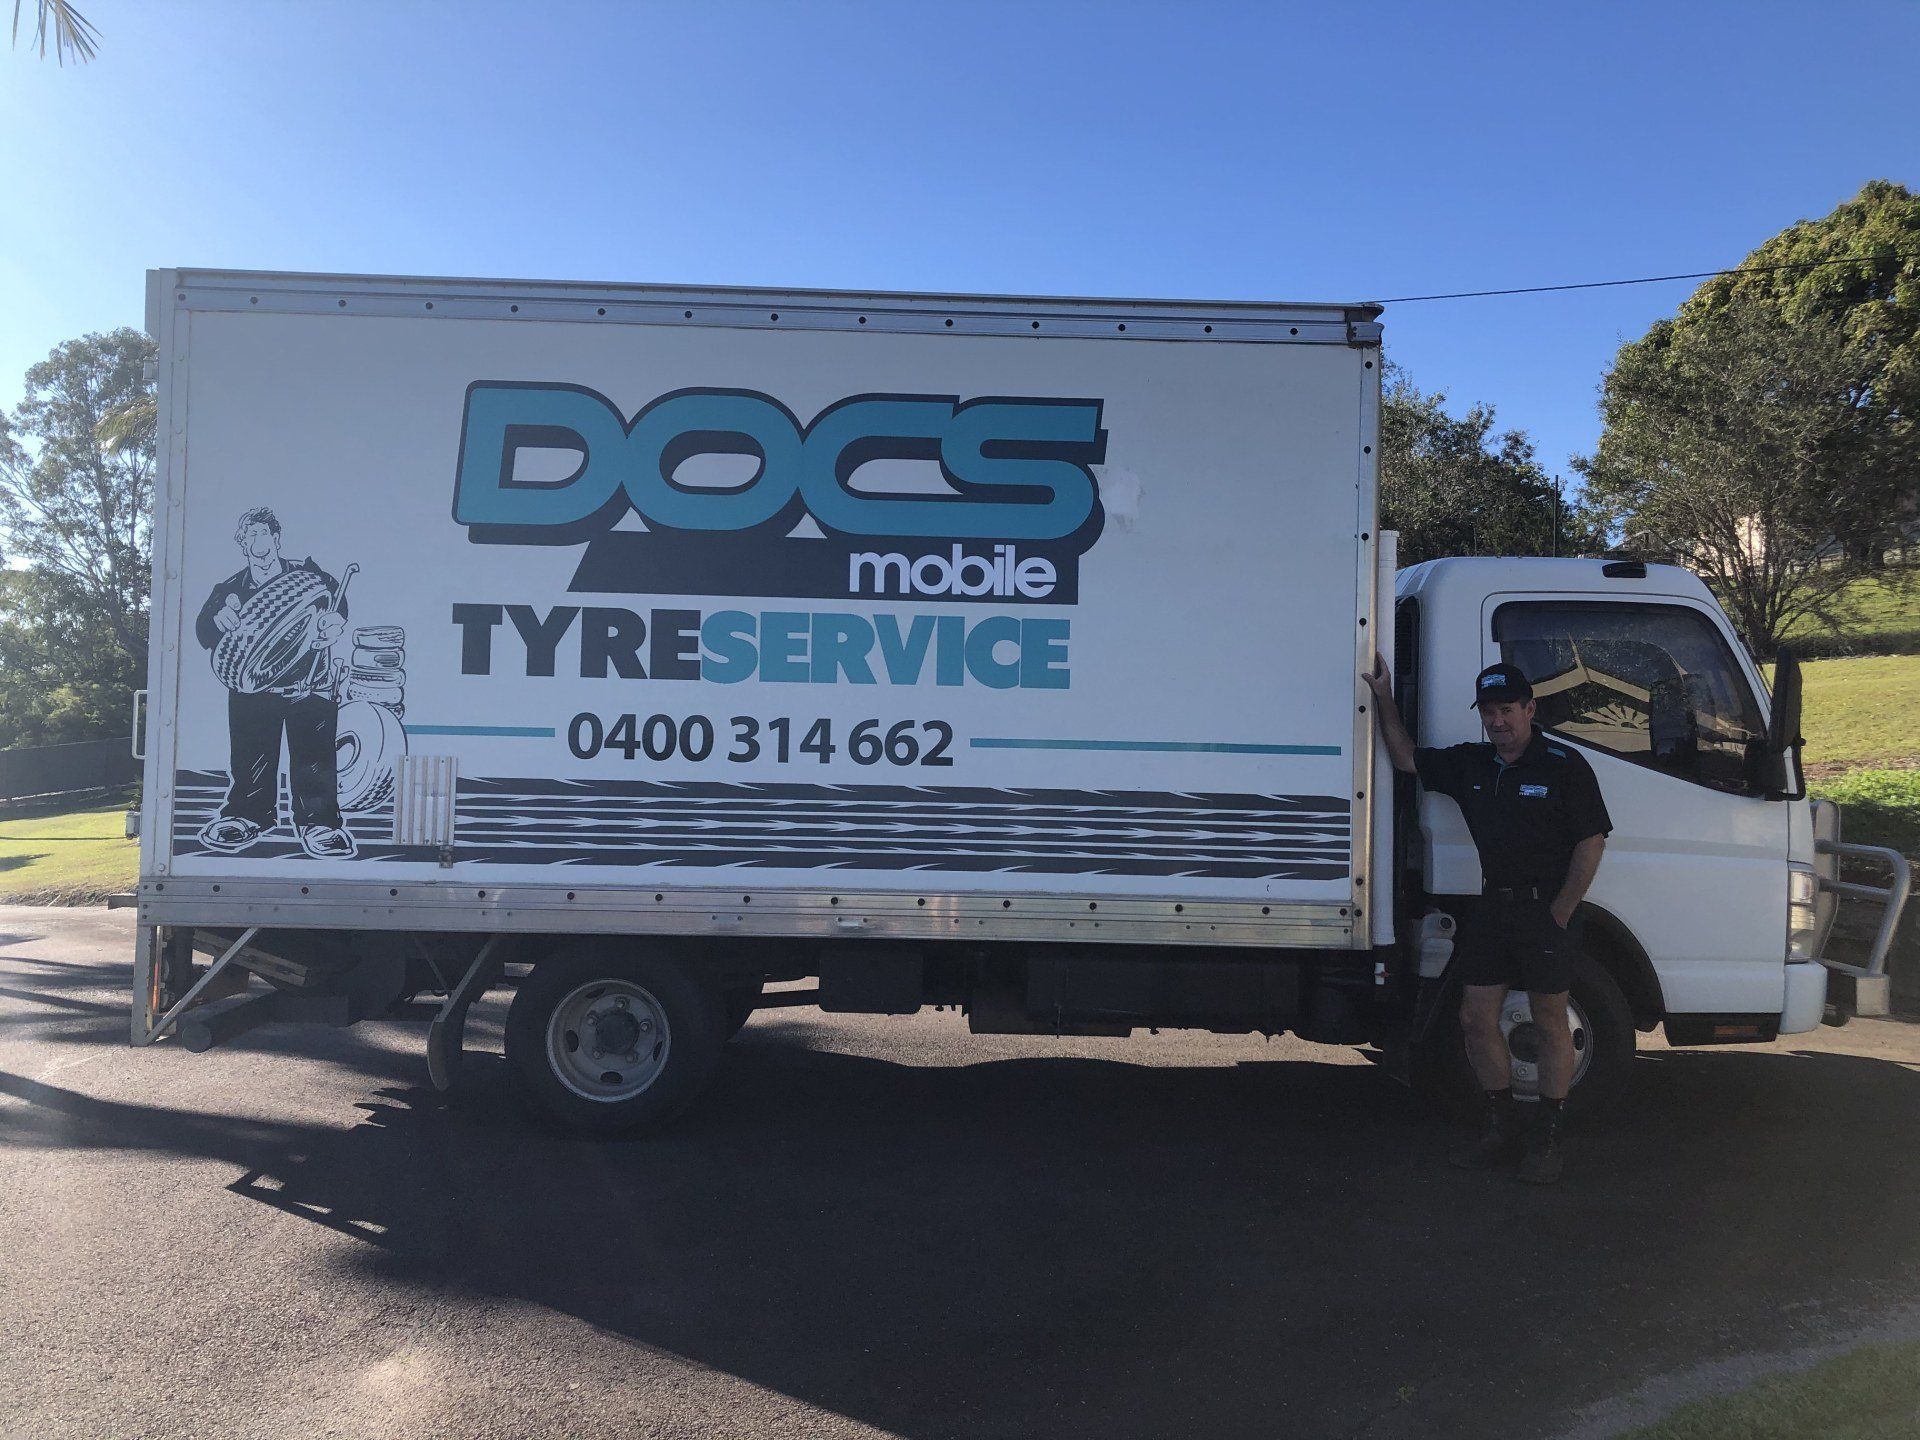 Repair Of Damaged Parts — Mobile Tyre Service In Sunshine Coast, QLD